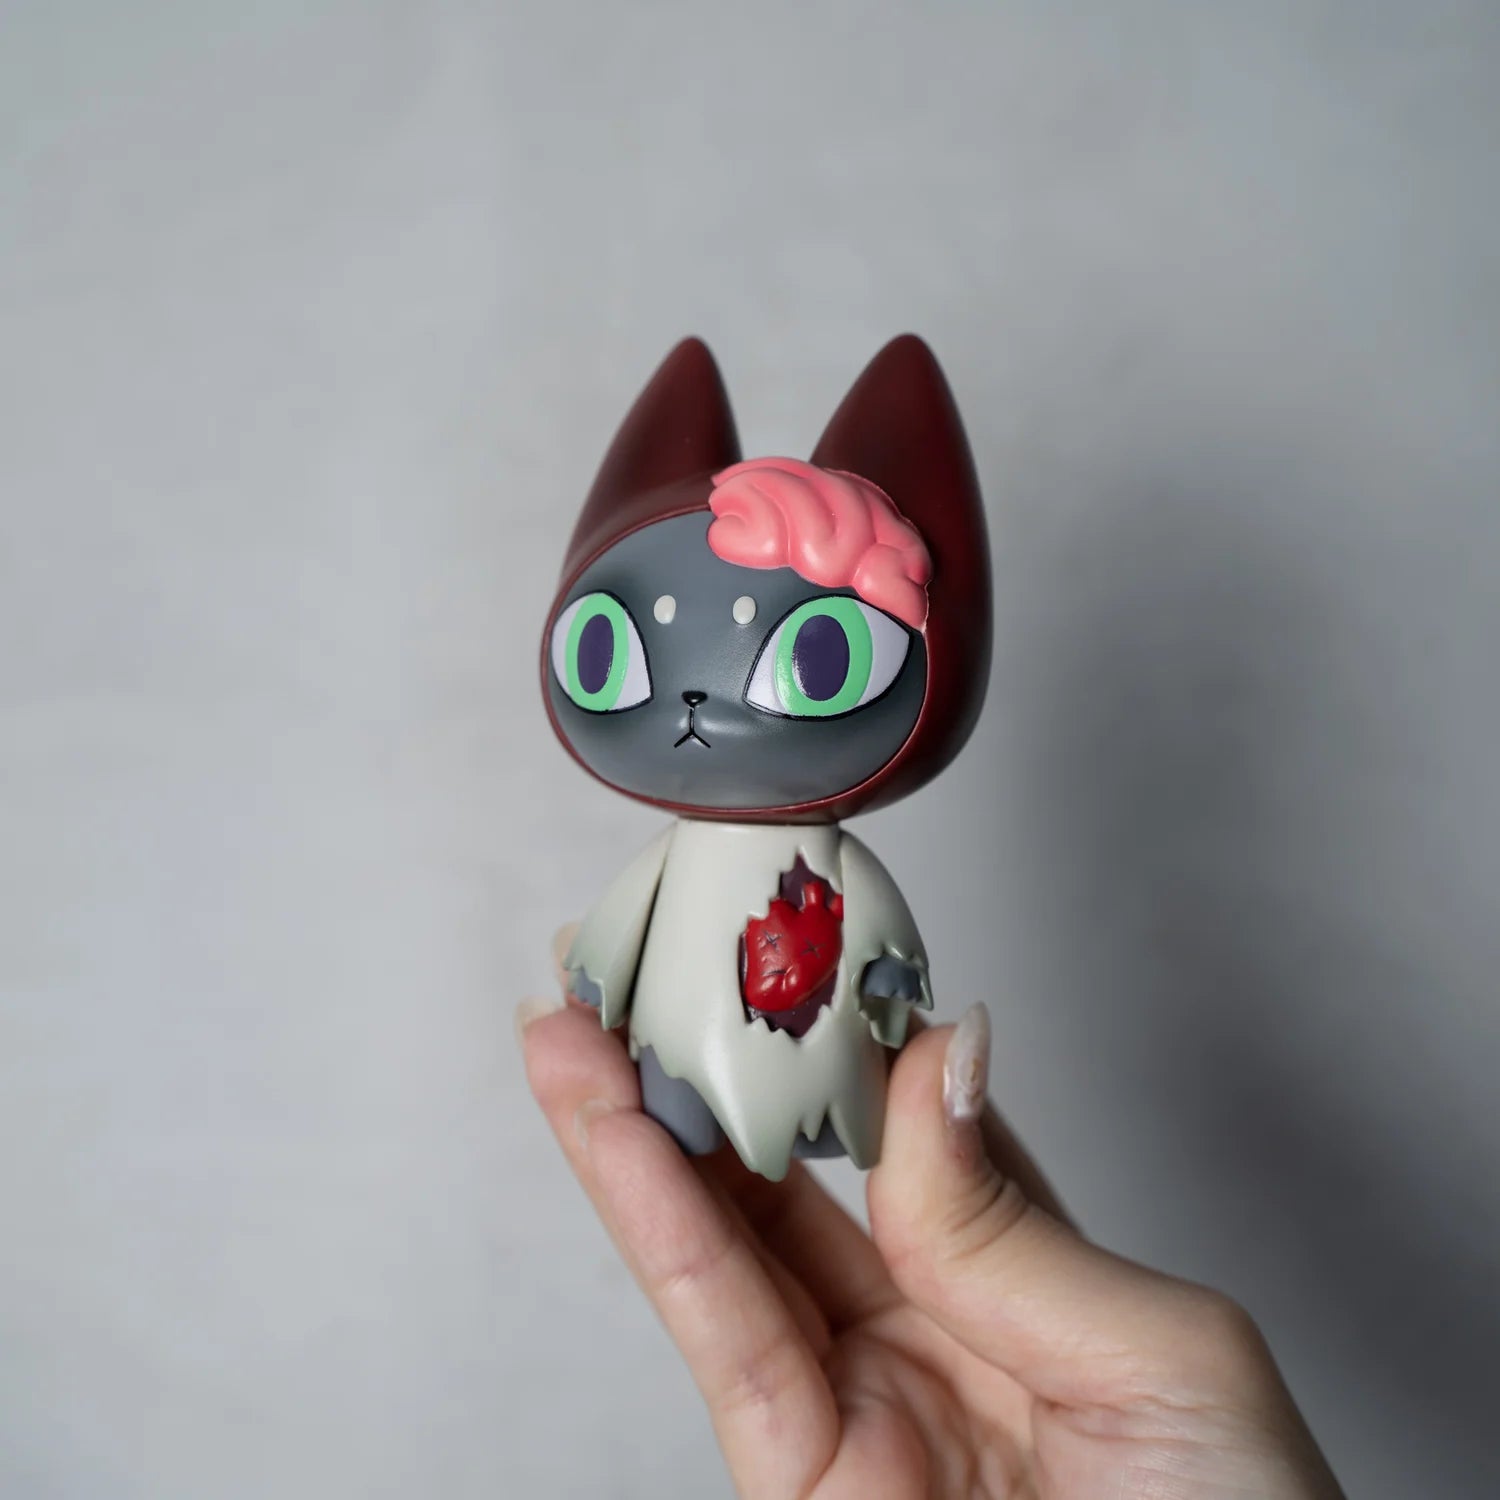 BAD MEAW 'RAGS' Vintage Horror Edition by MUEANFUN SAPANAKE - Preorder